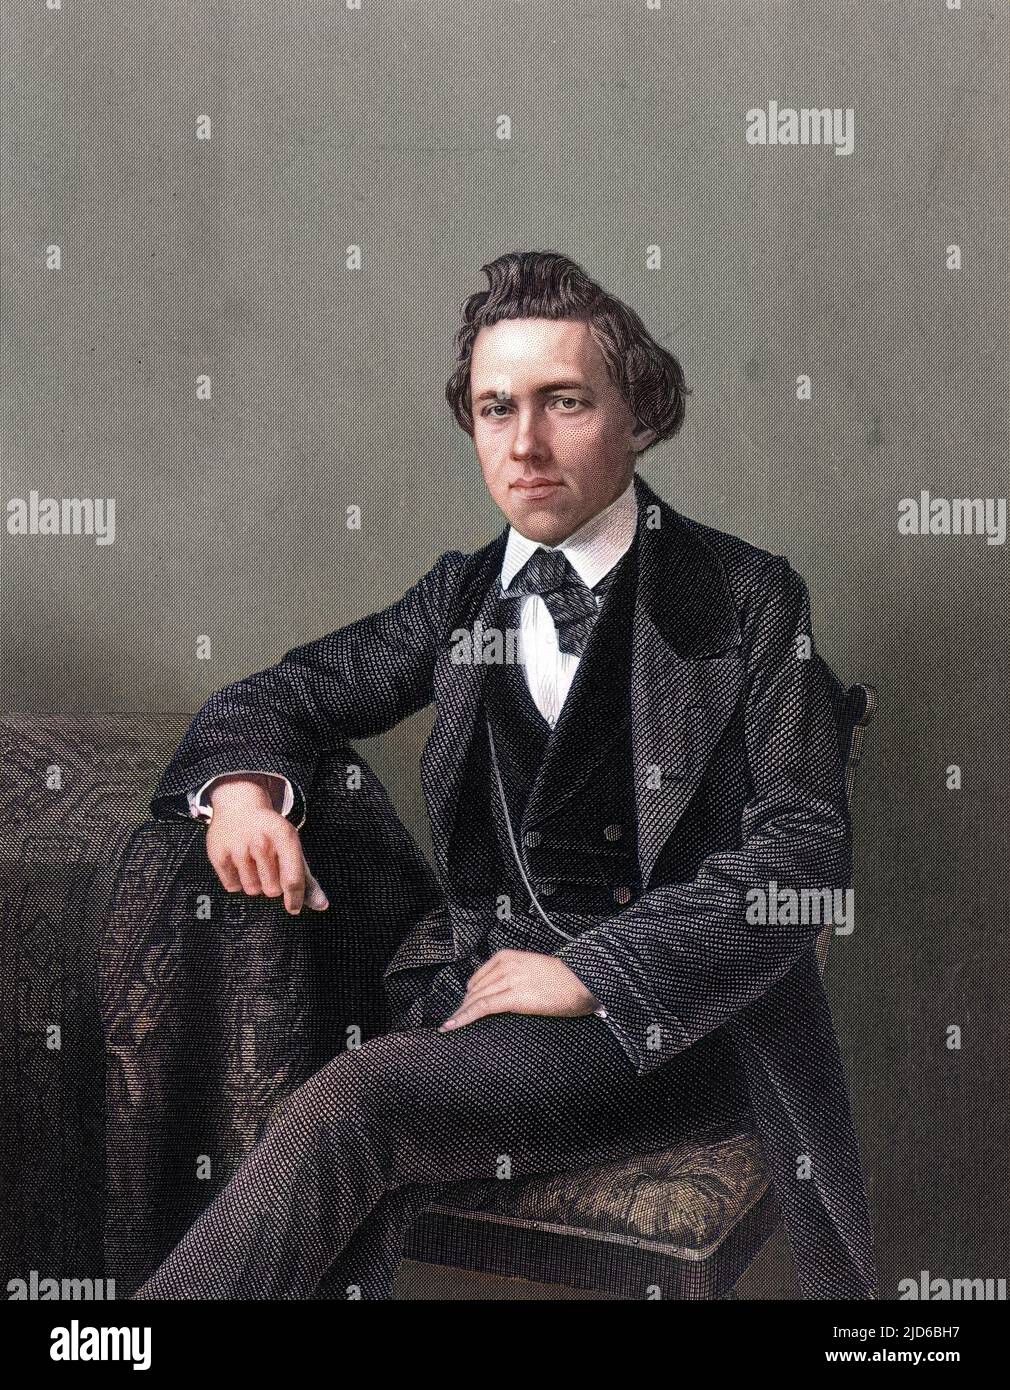 Why do many people consider Paul Morphy as the greatest chess player of all  time? - Quora